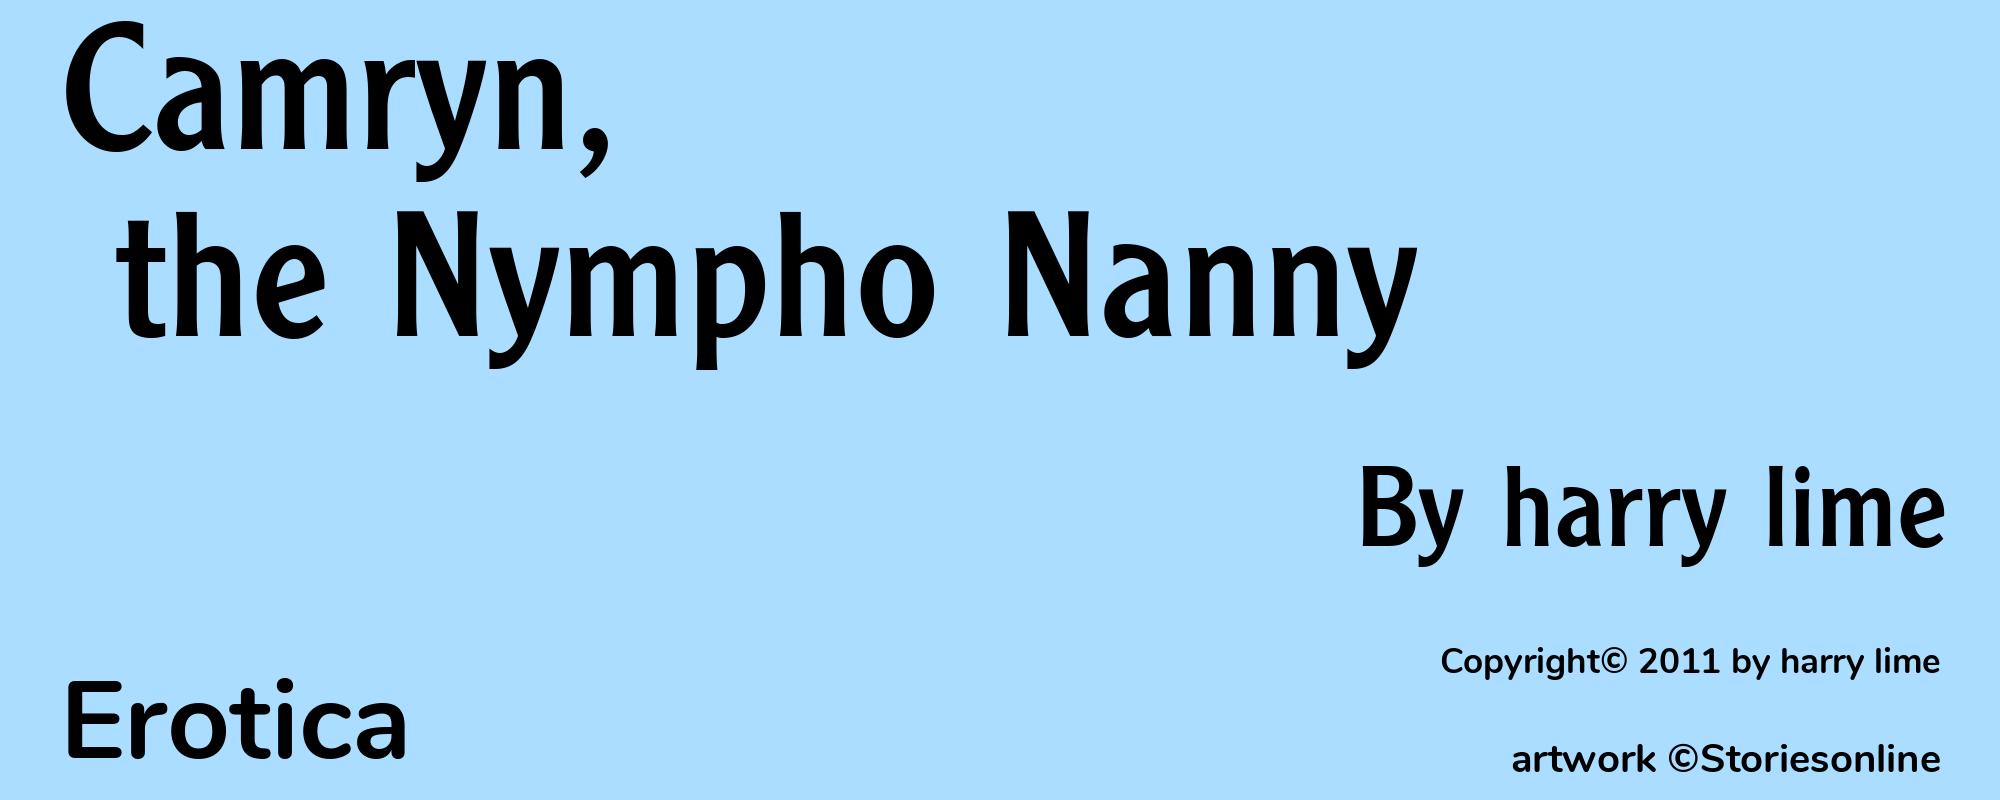 Camryn, the Nympho Nanny - Cover